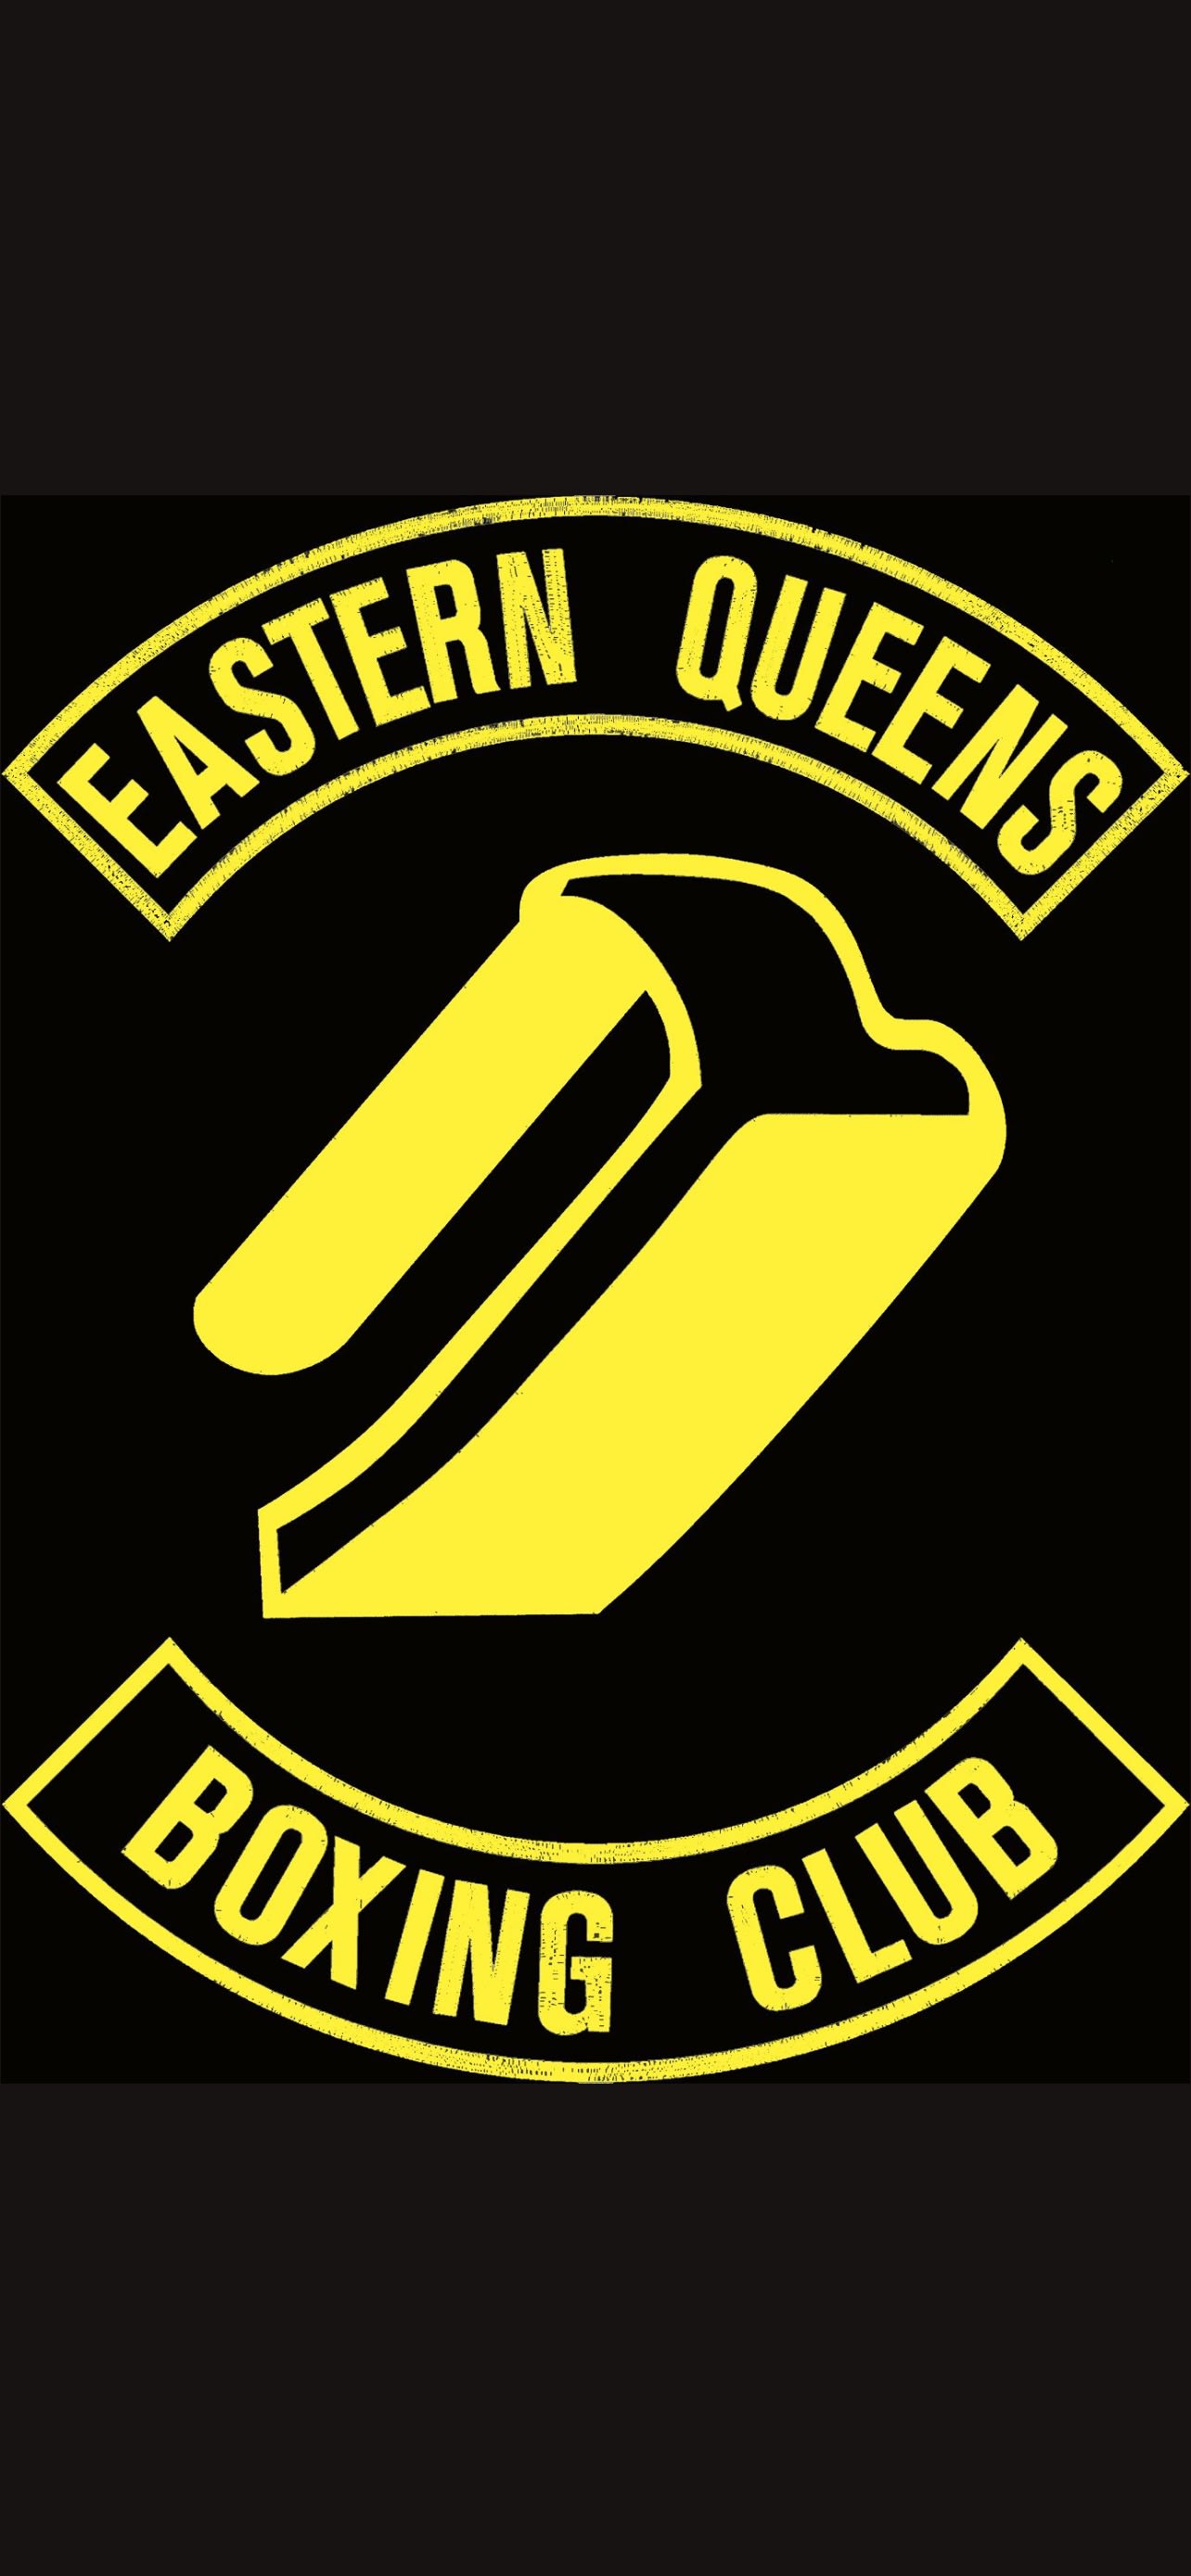 Eastern Queens Boxing Club 